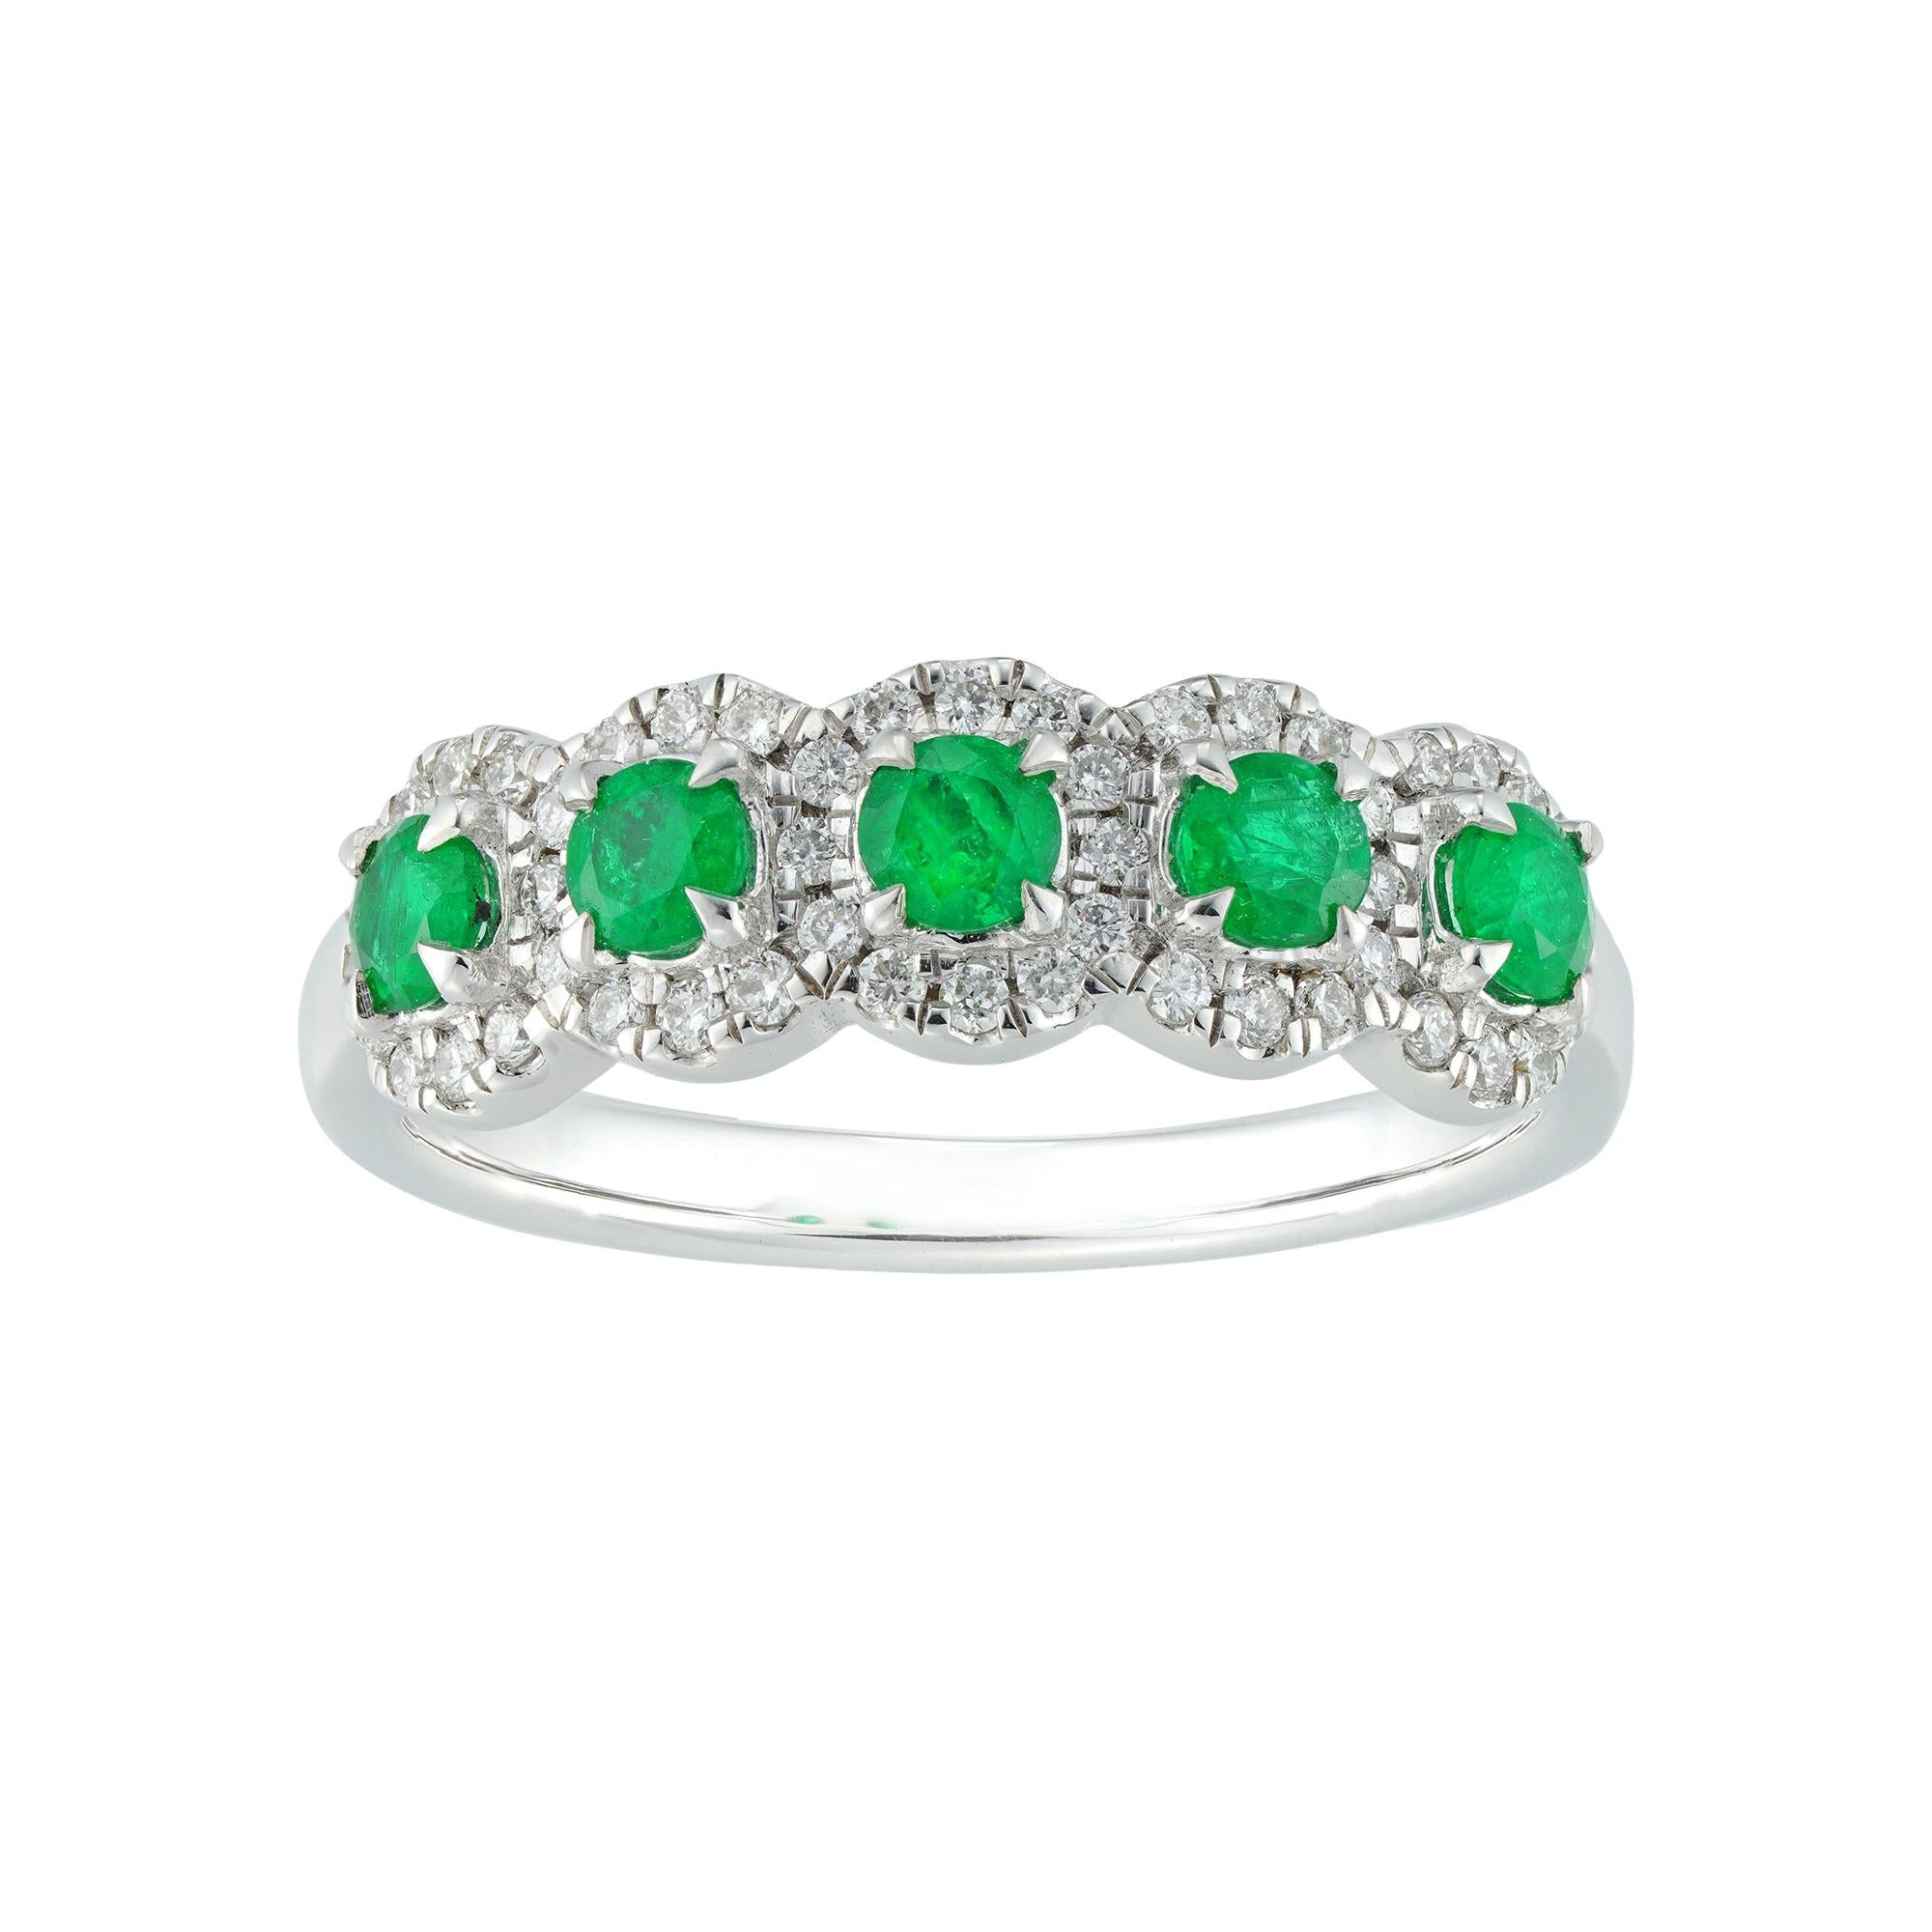 Five Emerald and Diamond Cluster Ring